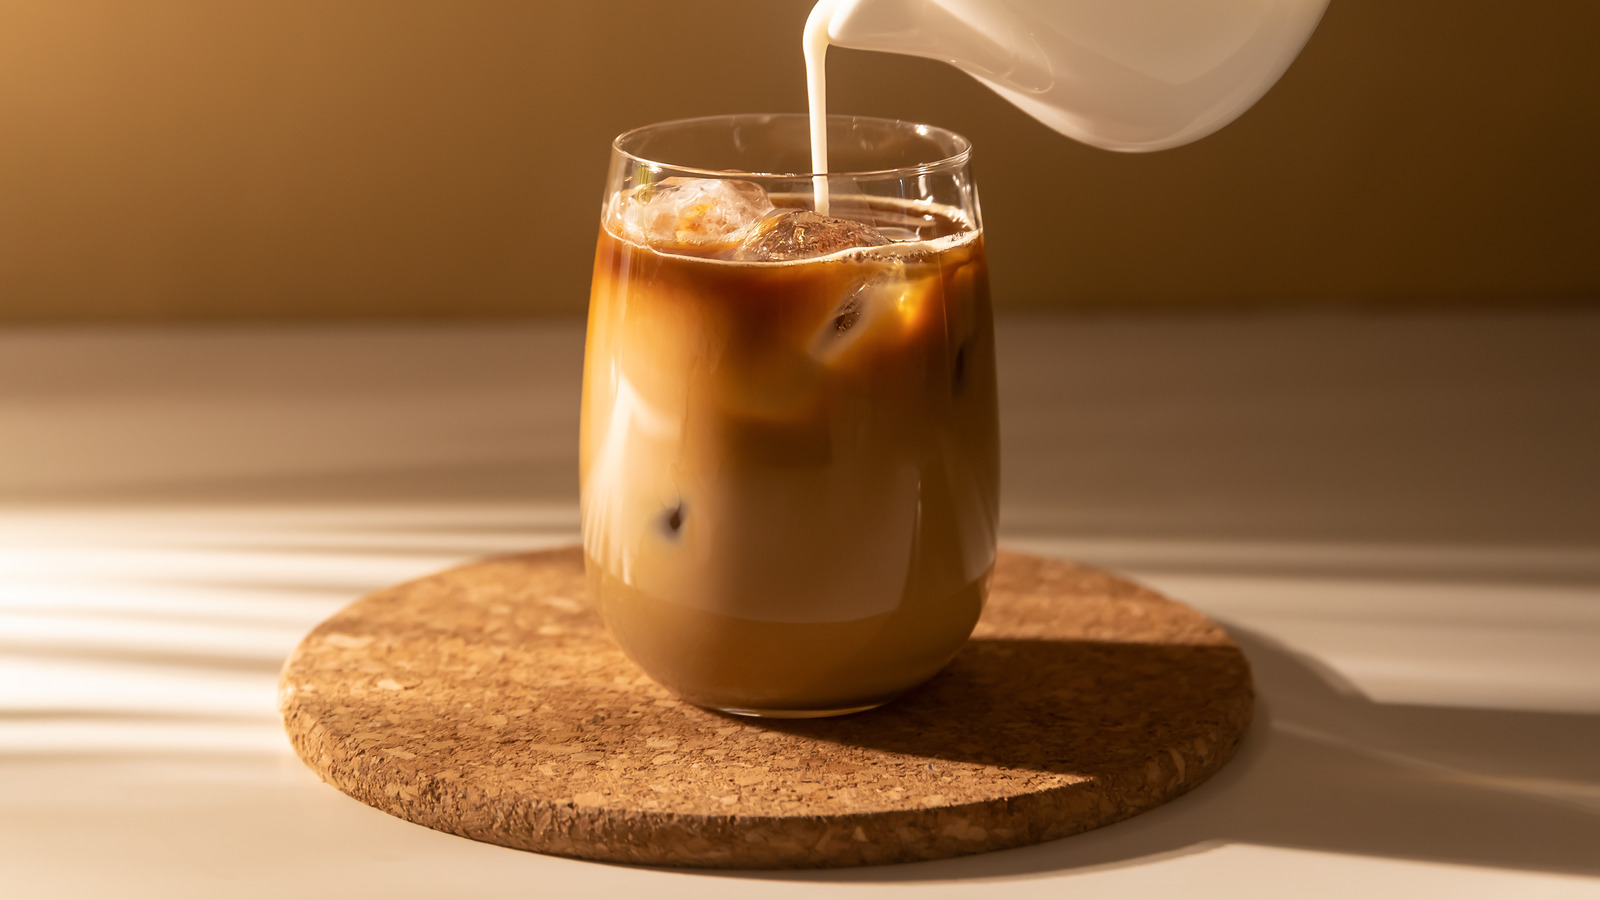 https://www.thedailymeal.com/img/gallery/the-real-reason-why-people-love-iced-coffee-year-round/l-intro-1664306003.jpg